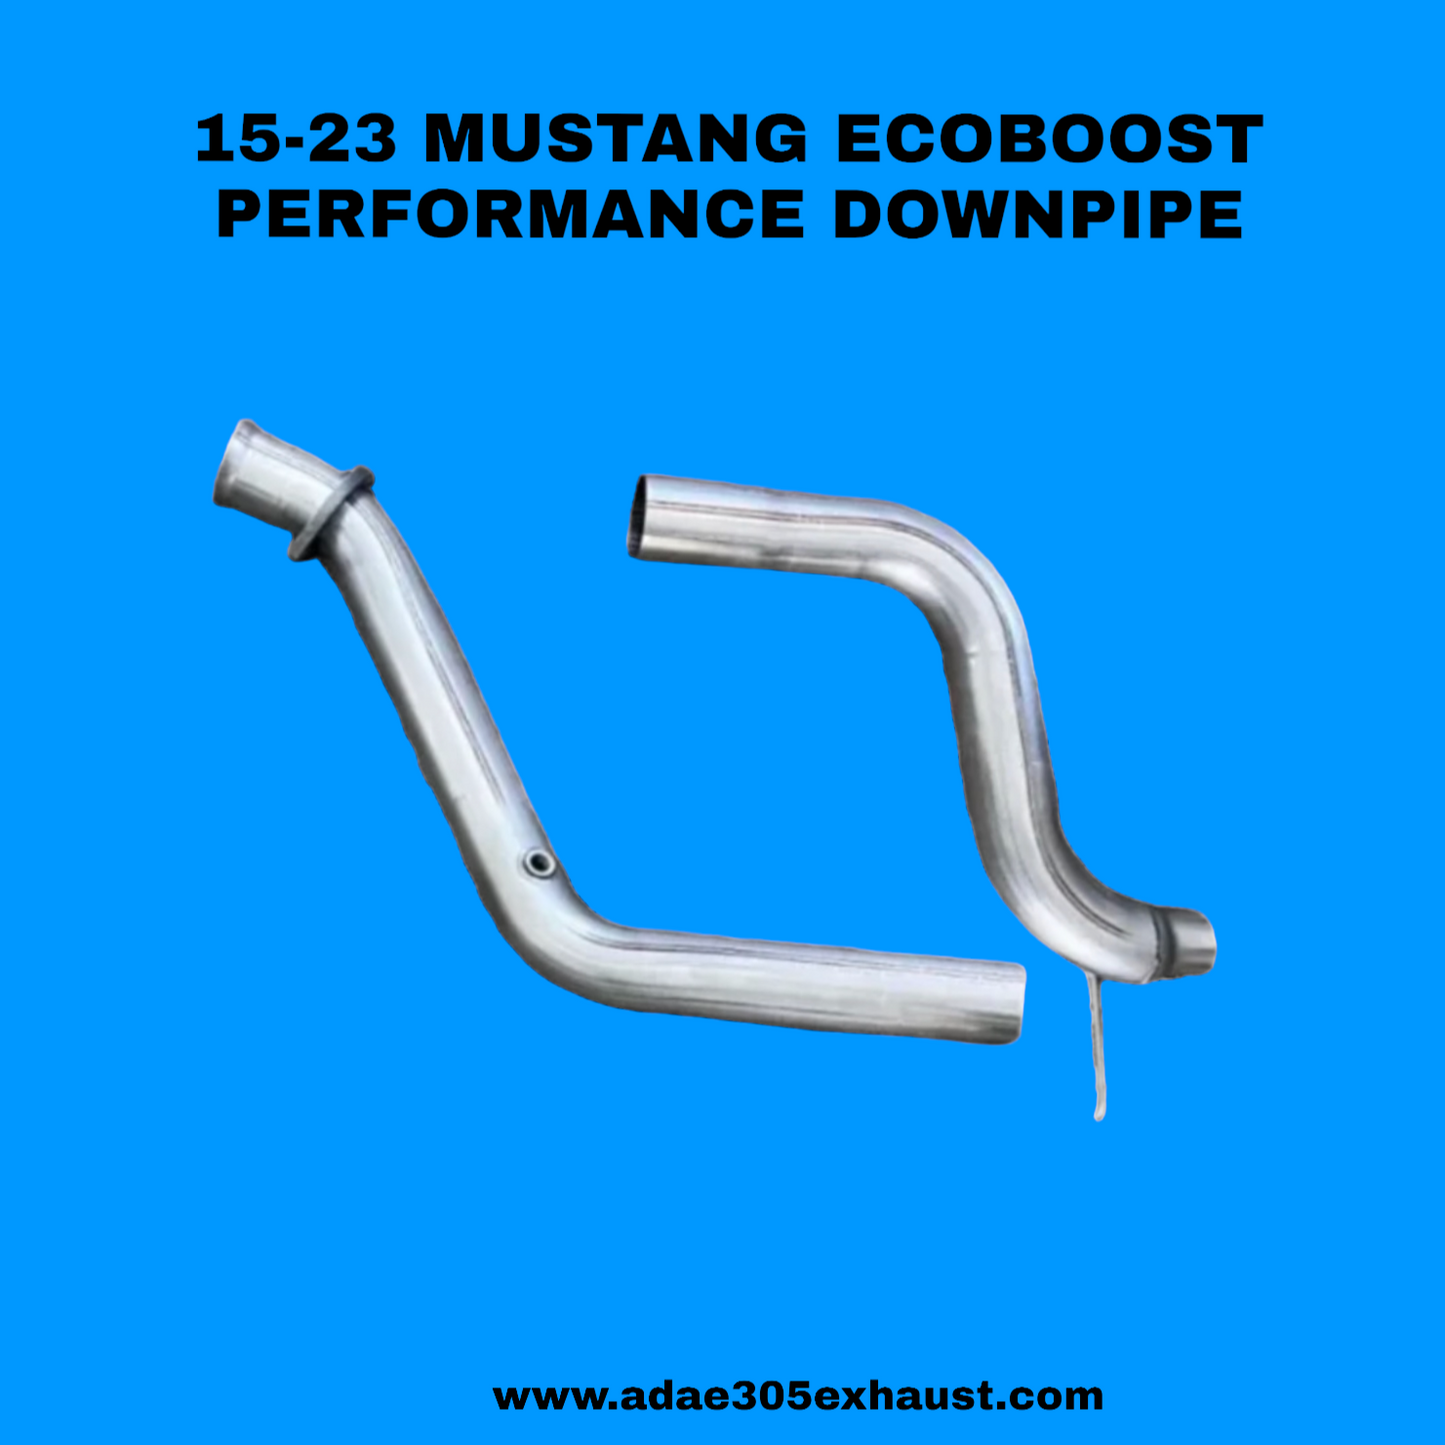 15-23 MUSTANG ECOBOOST  PERFORMANCE DOWNPIPE